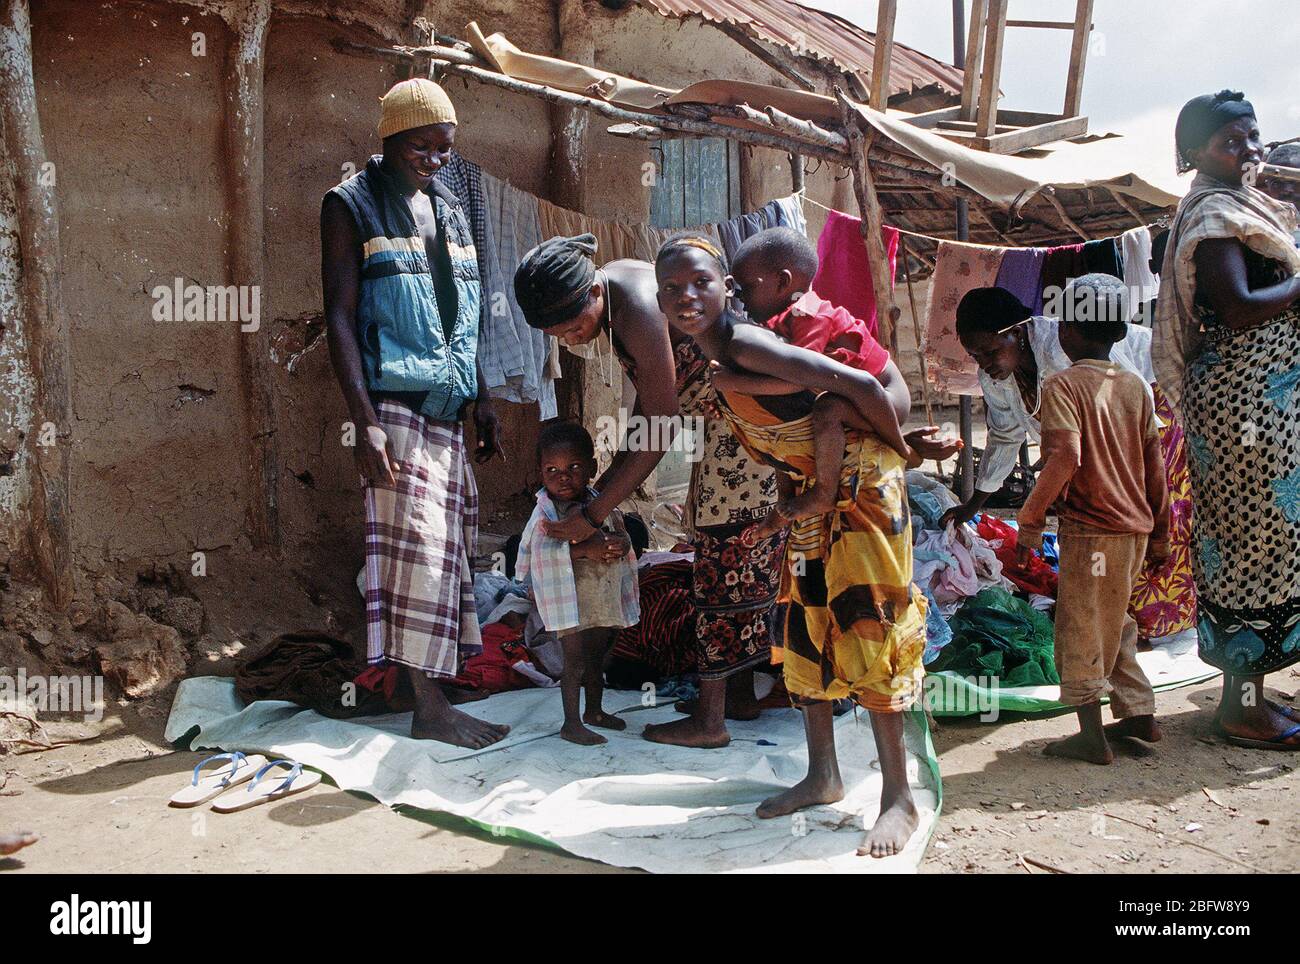 1993 - A little child tries on a shirt in the market in Mogambo village in Somalia during operation Continue Hope. Stock Photo